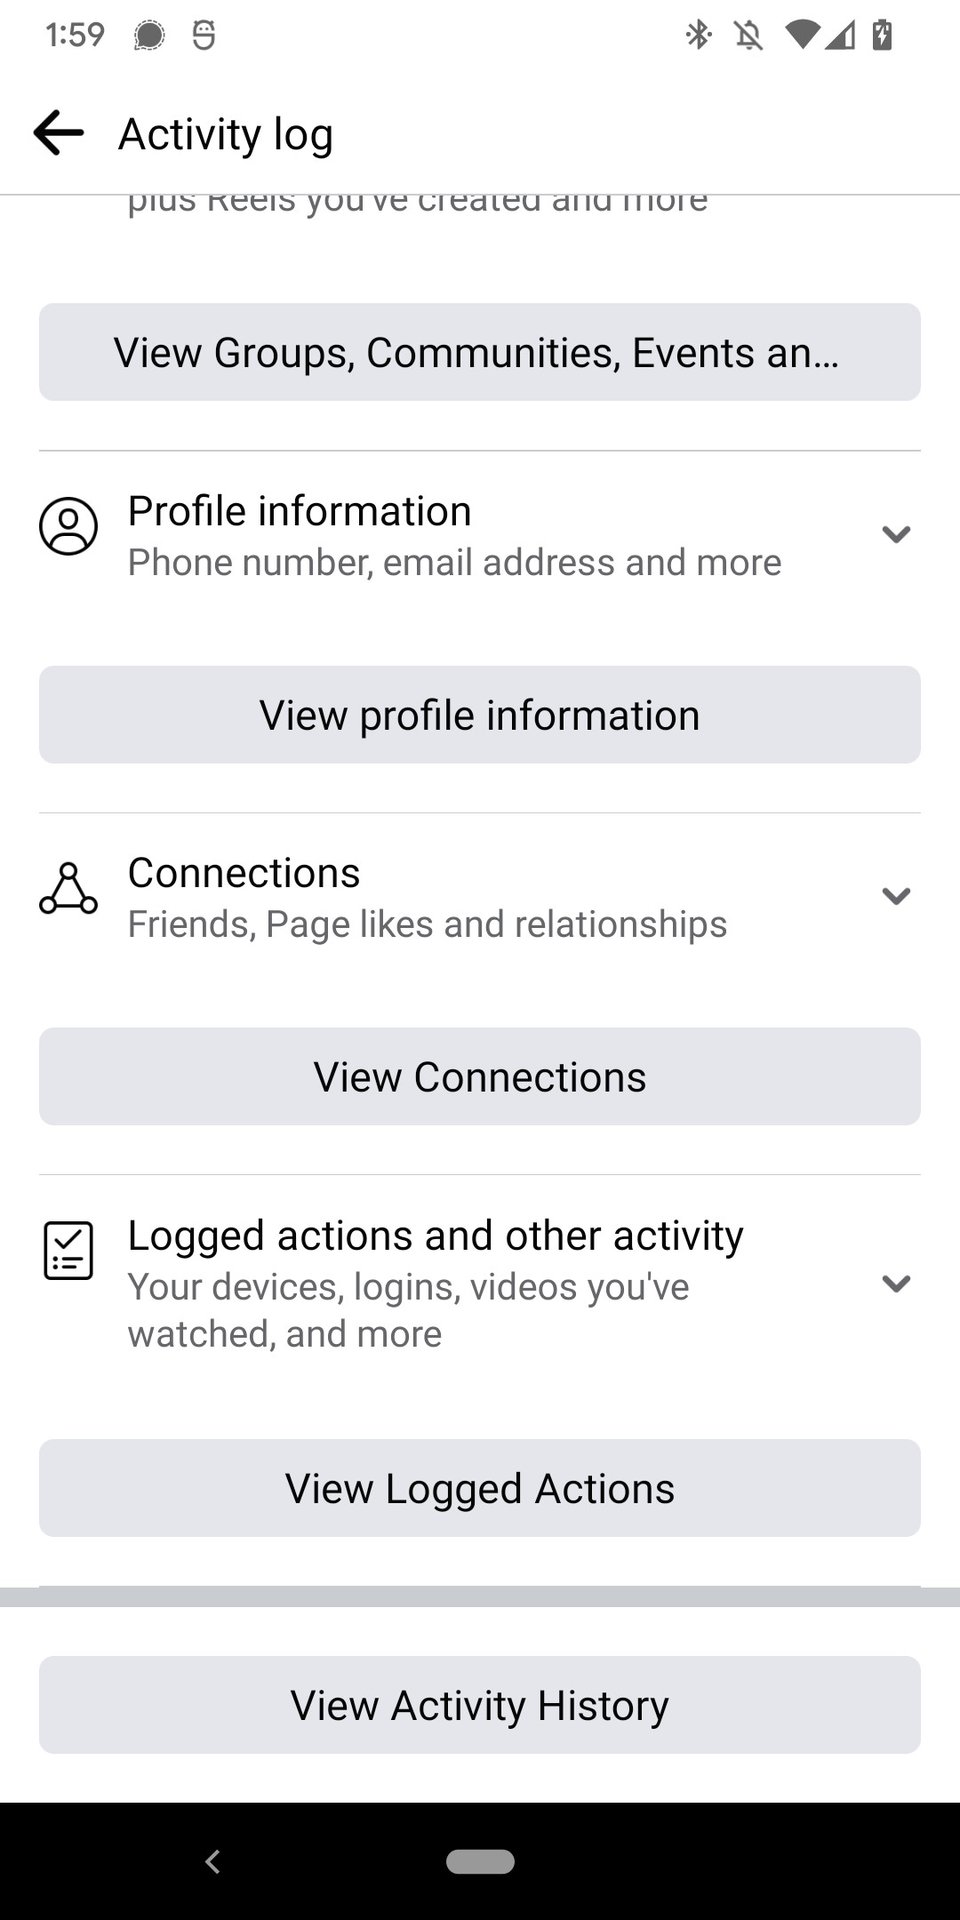 A screenshot of the Facebook mobile app showing the Settings menu showing the View Activity History entry at the bottom of the screen.